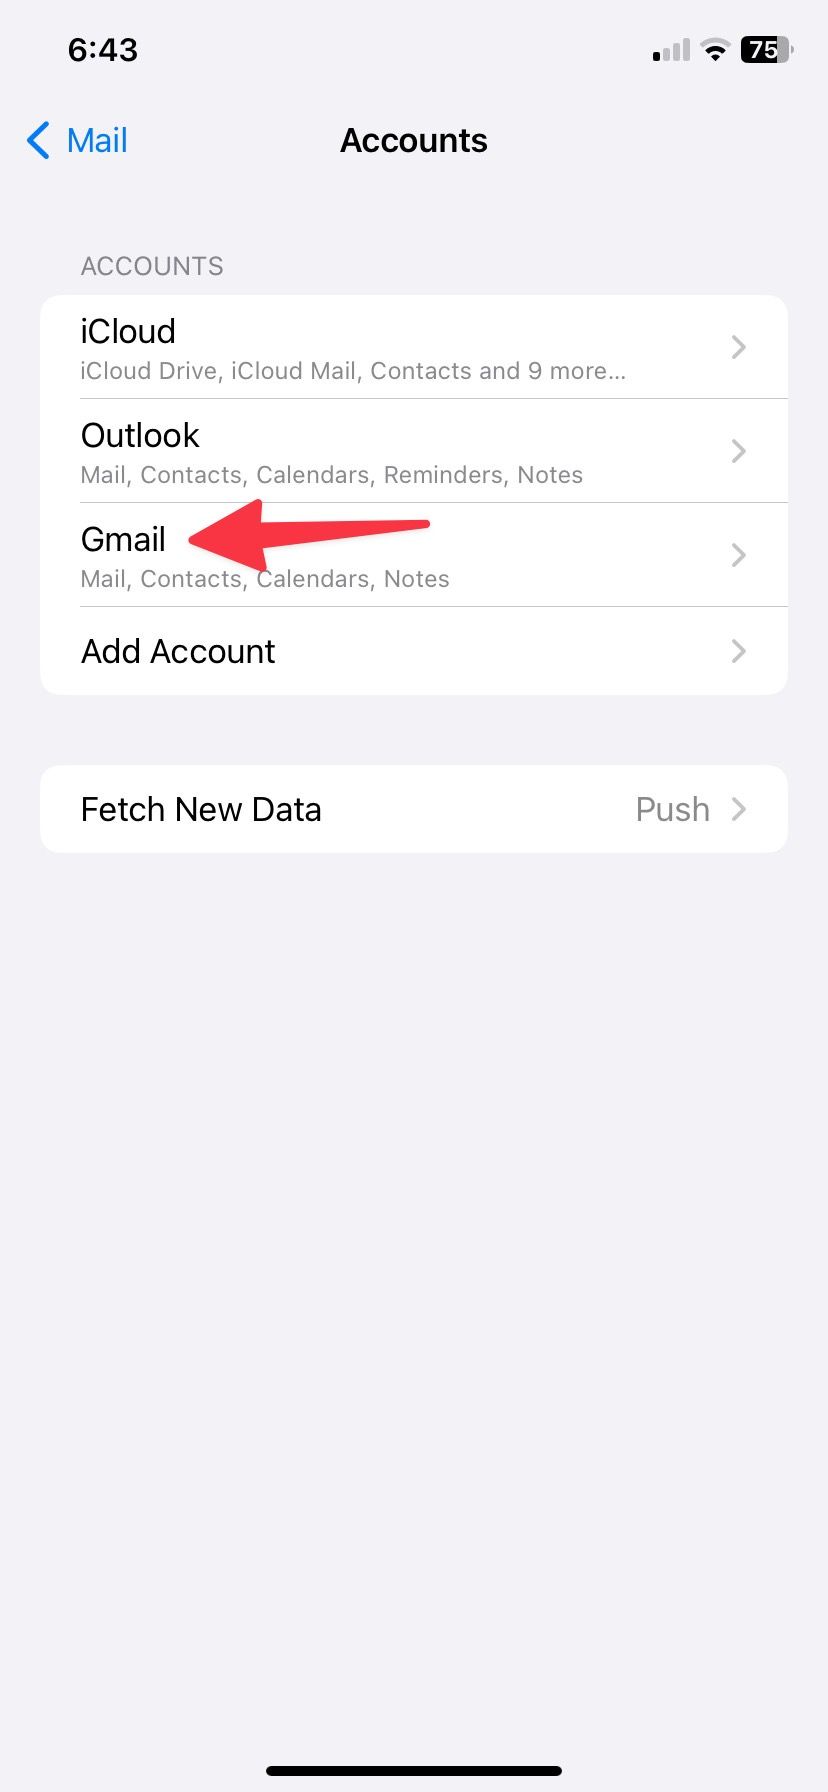 Select the Gmail tab on your iPhone